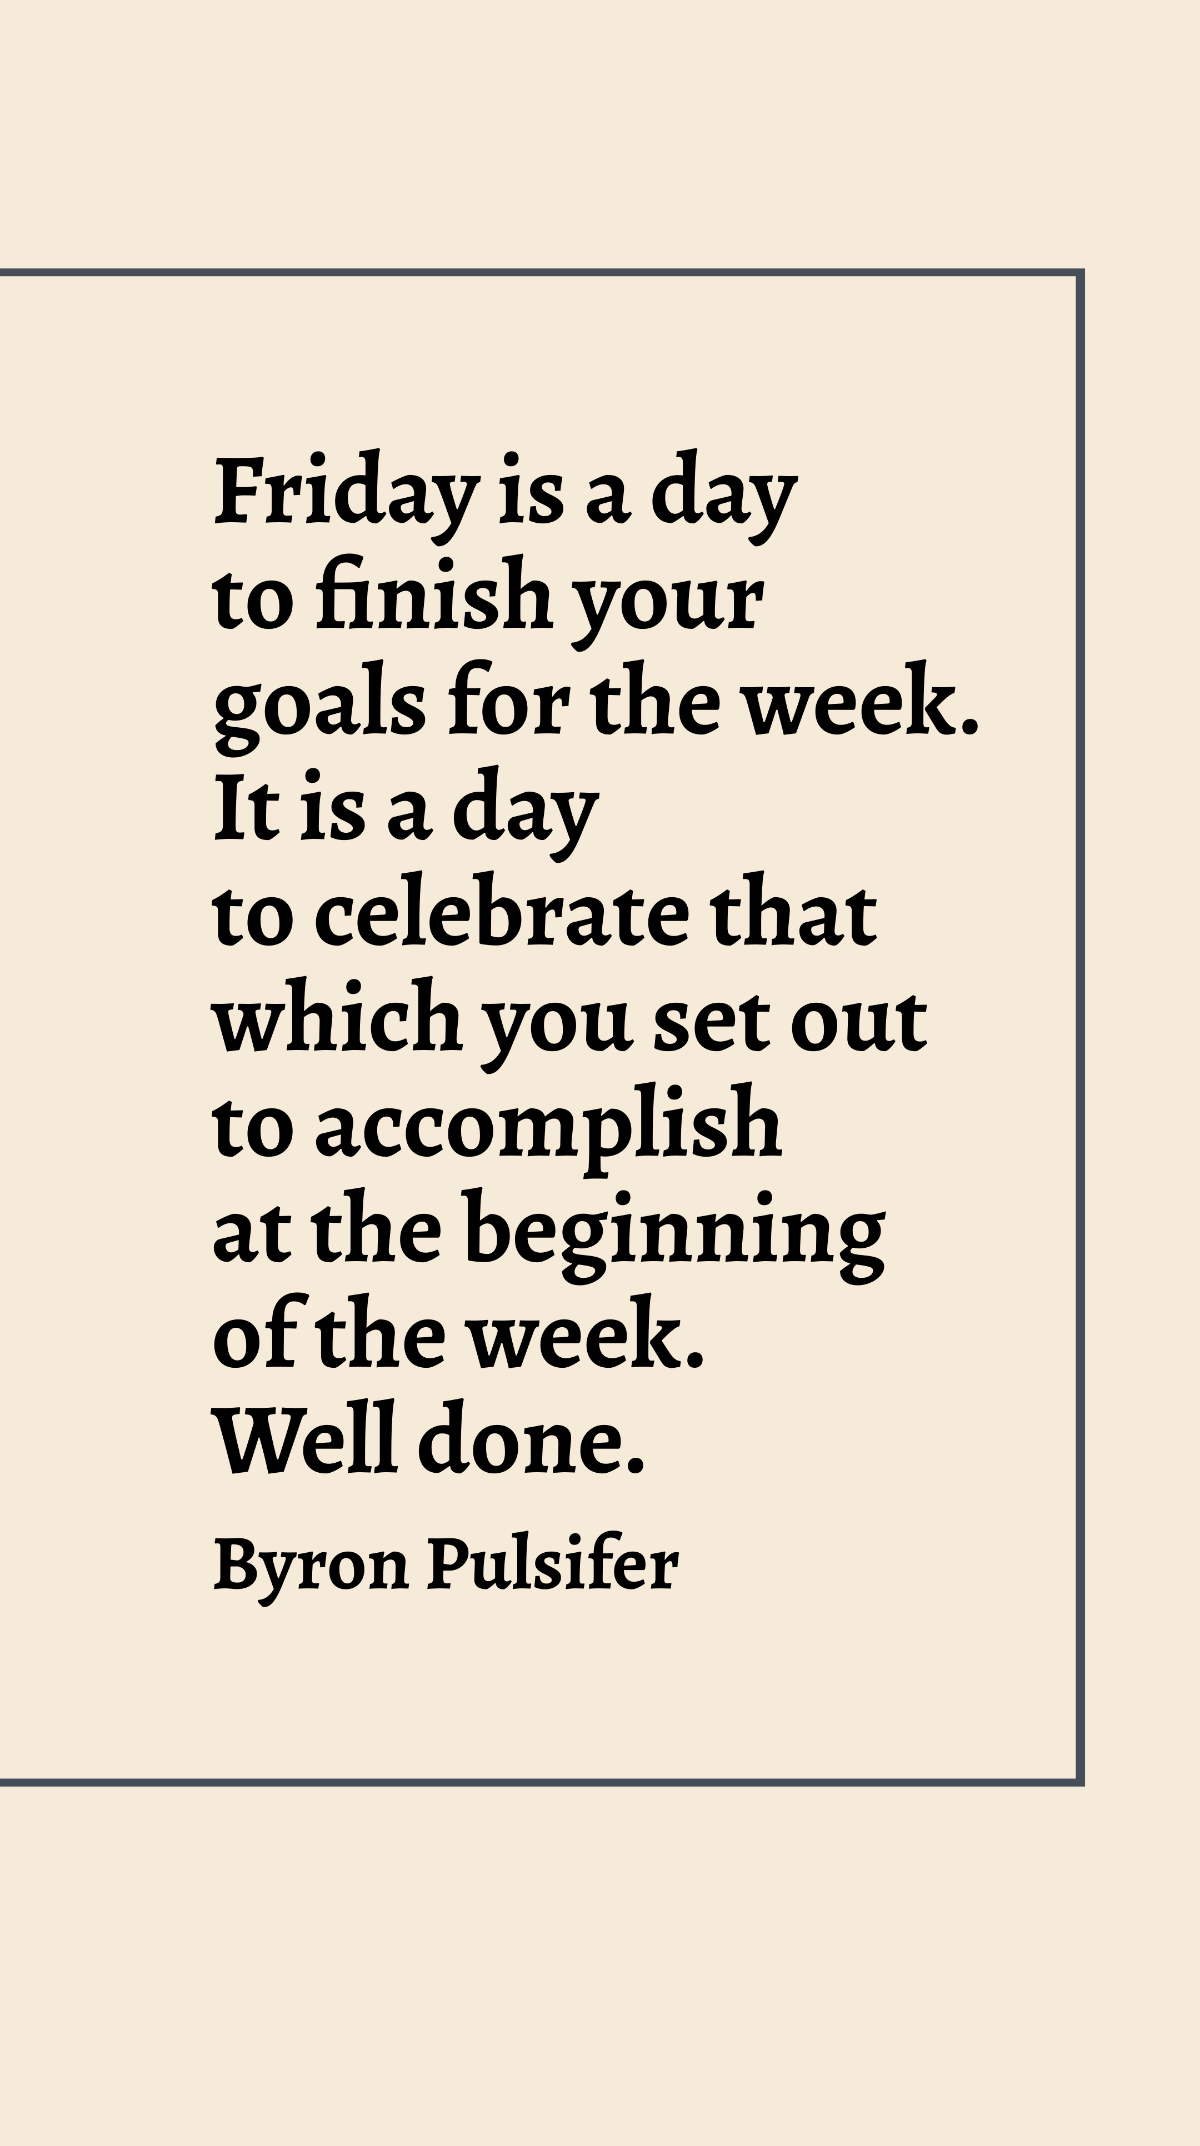 Byron Pulsifer - Friday is a day to finish your goals for the week. It is a day to celebrate that which you set out to accomplish at the beginning of the week. Well done. Template